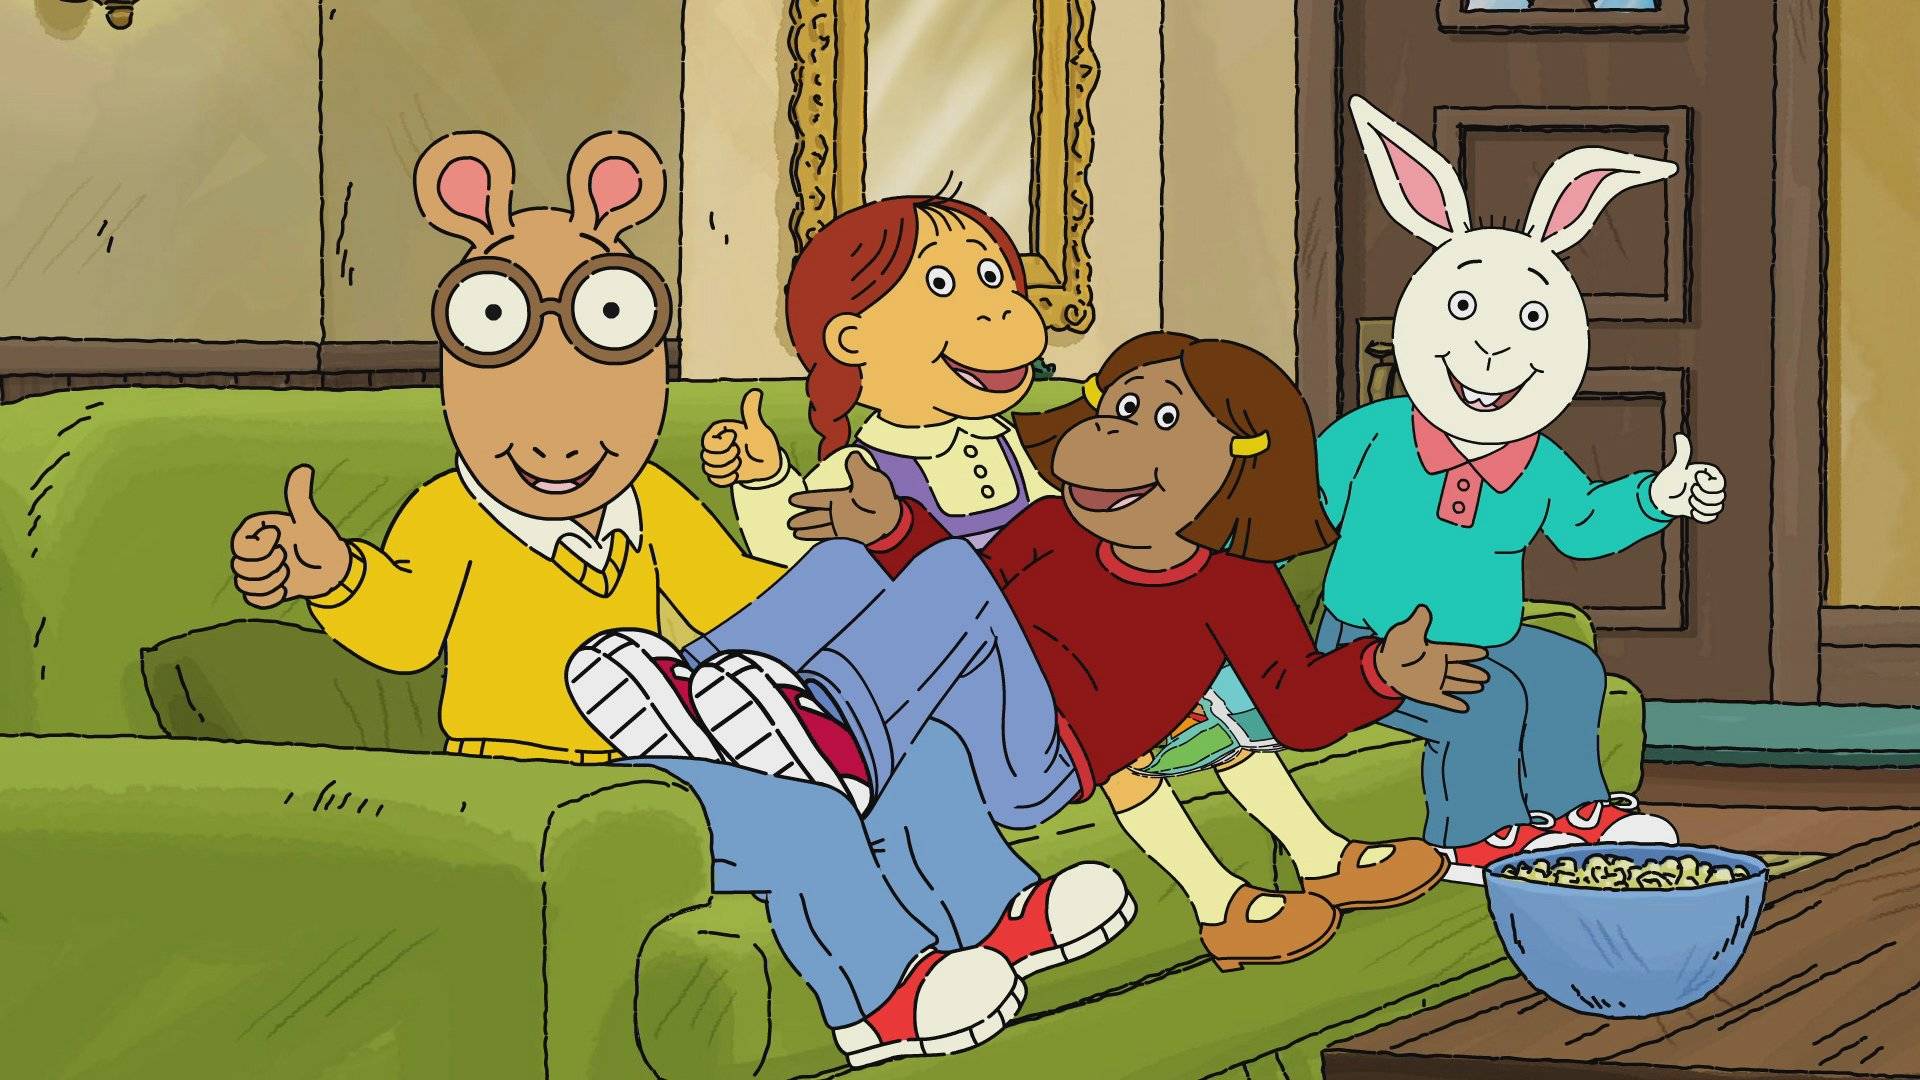 ‘Arthur’s Not Going Anywhere’: Producer Says Show Will Focus On Digital Future, Not New TV Episodes